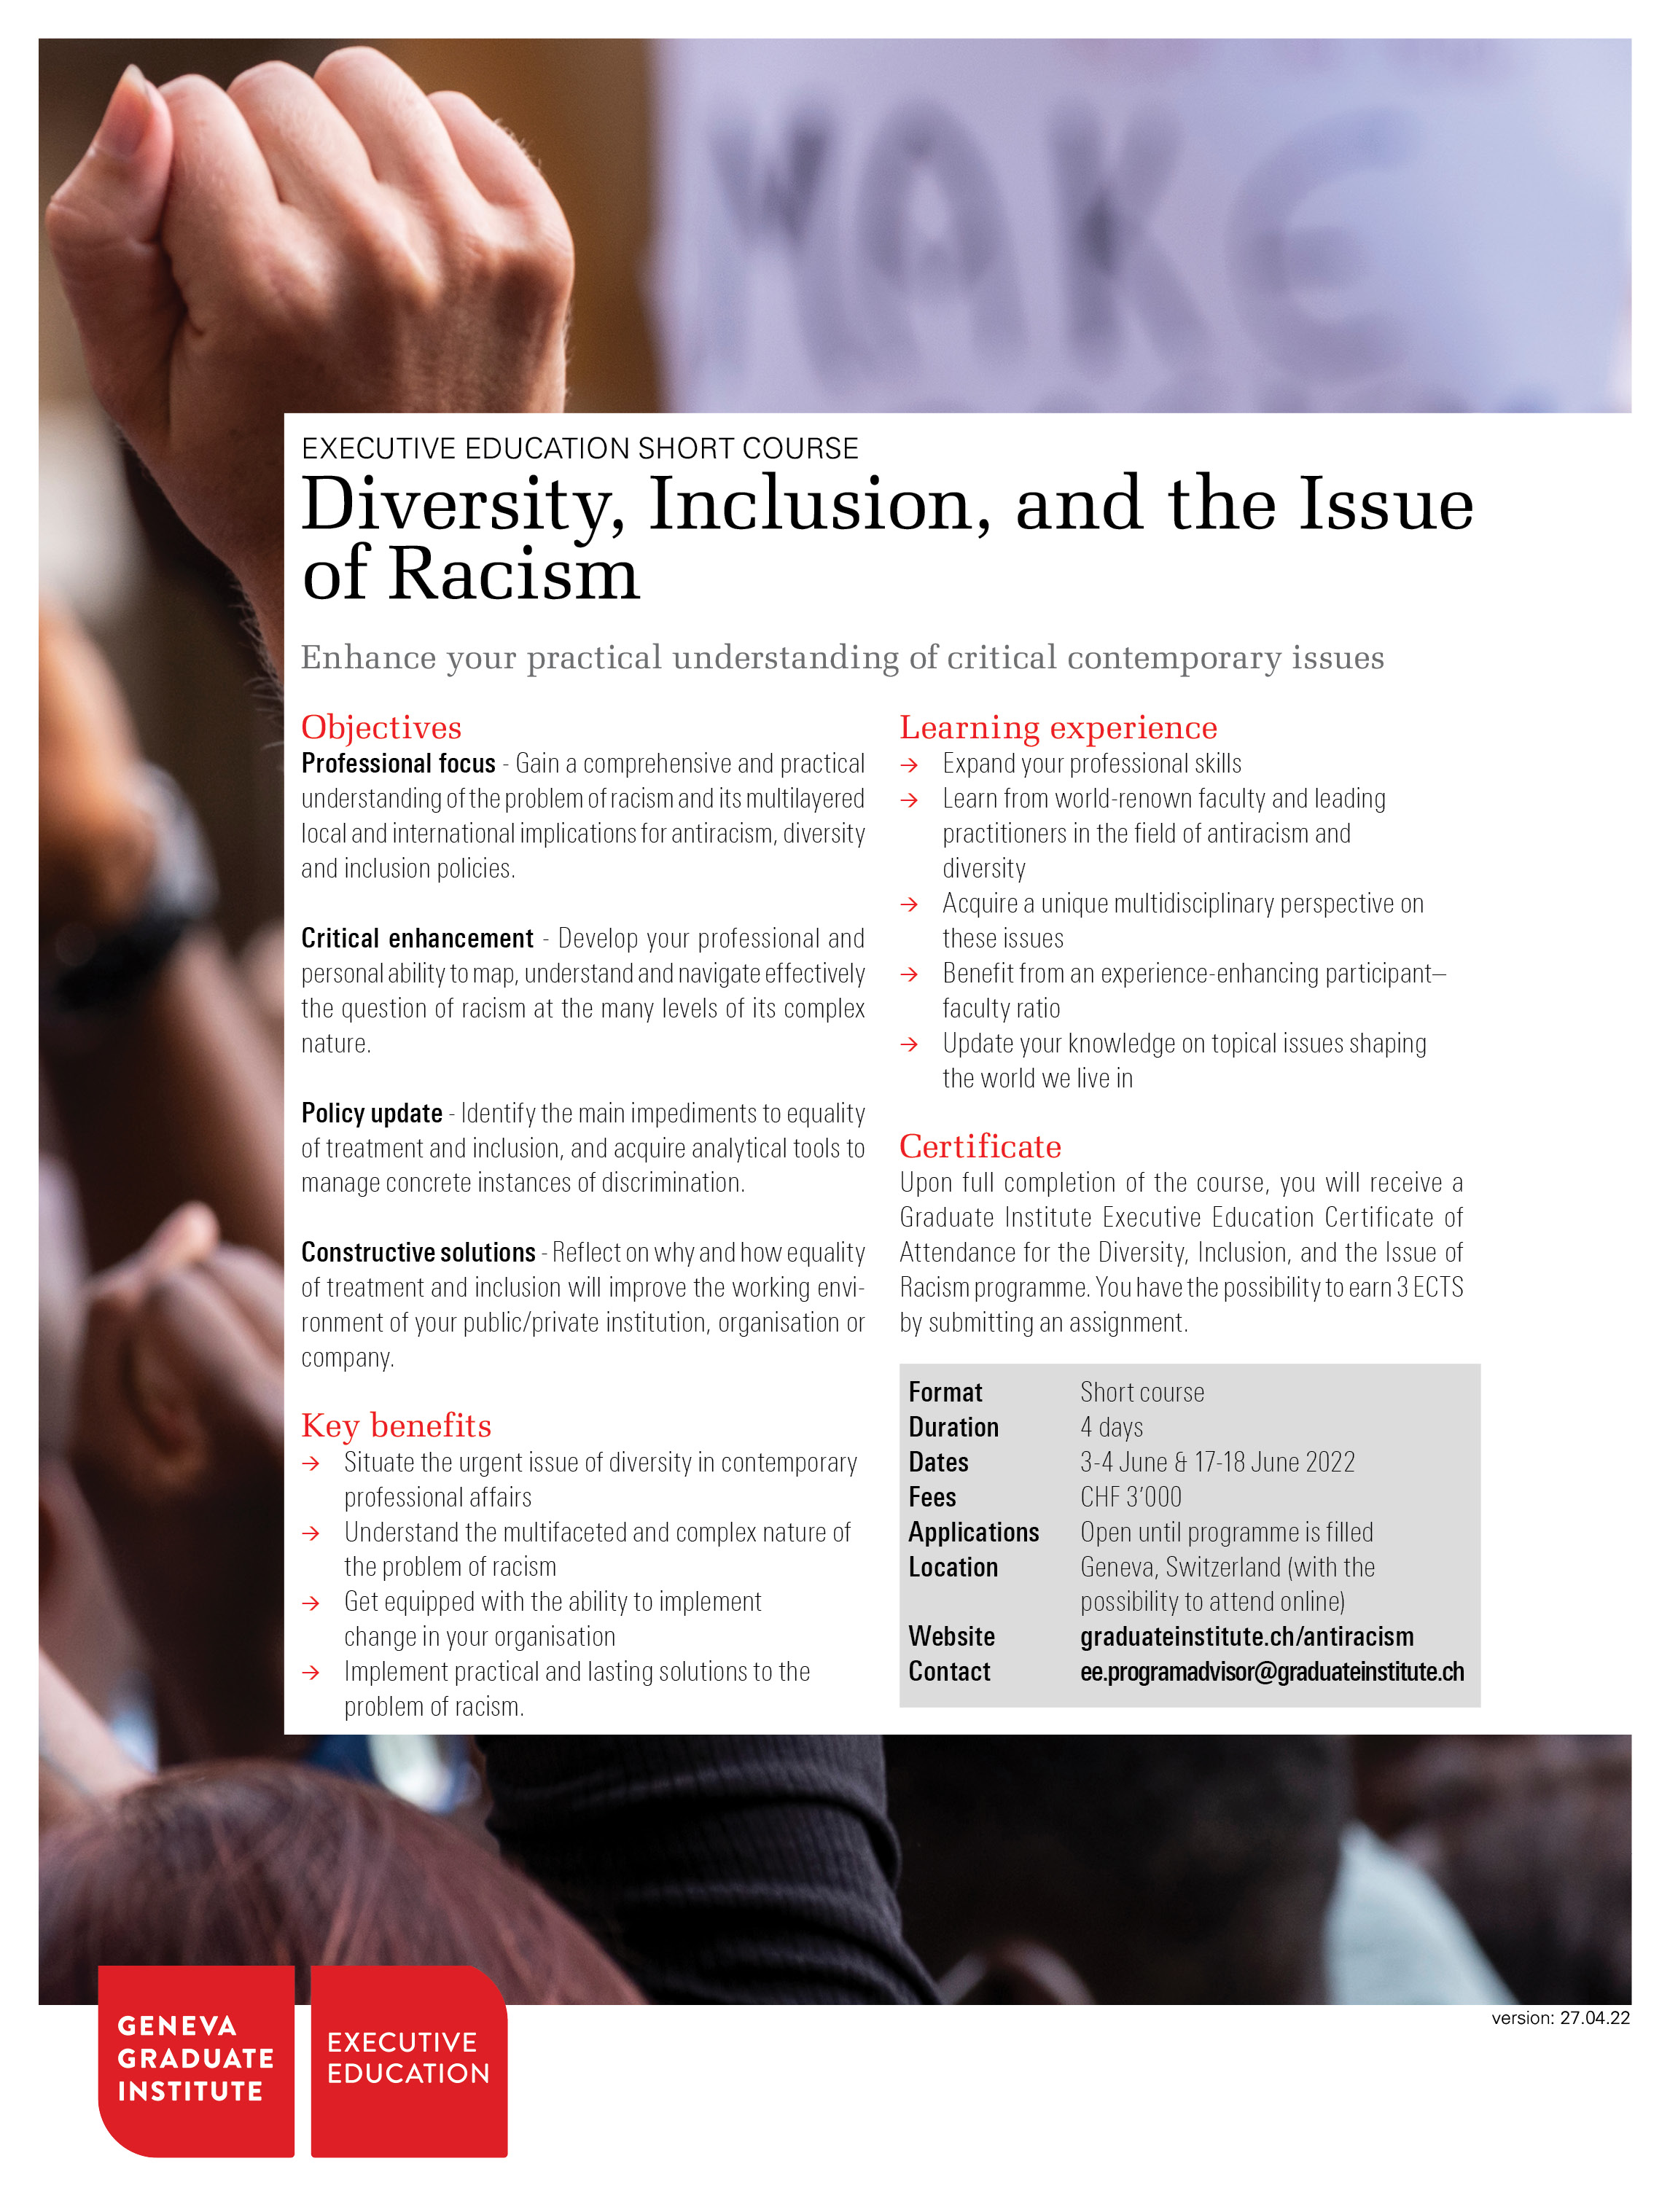 Thumbnail flyer Diversity, Inclusion, and the Issue of Racism